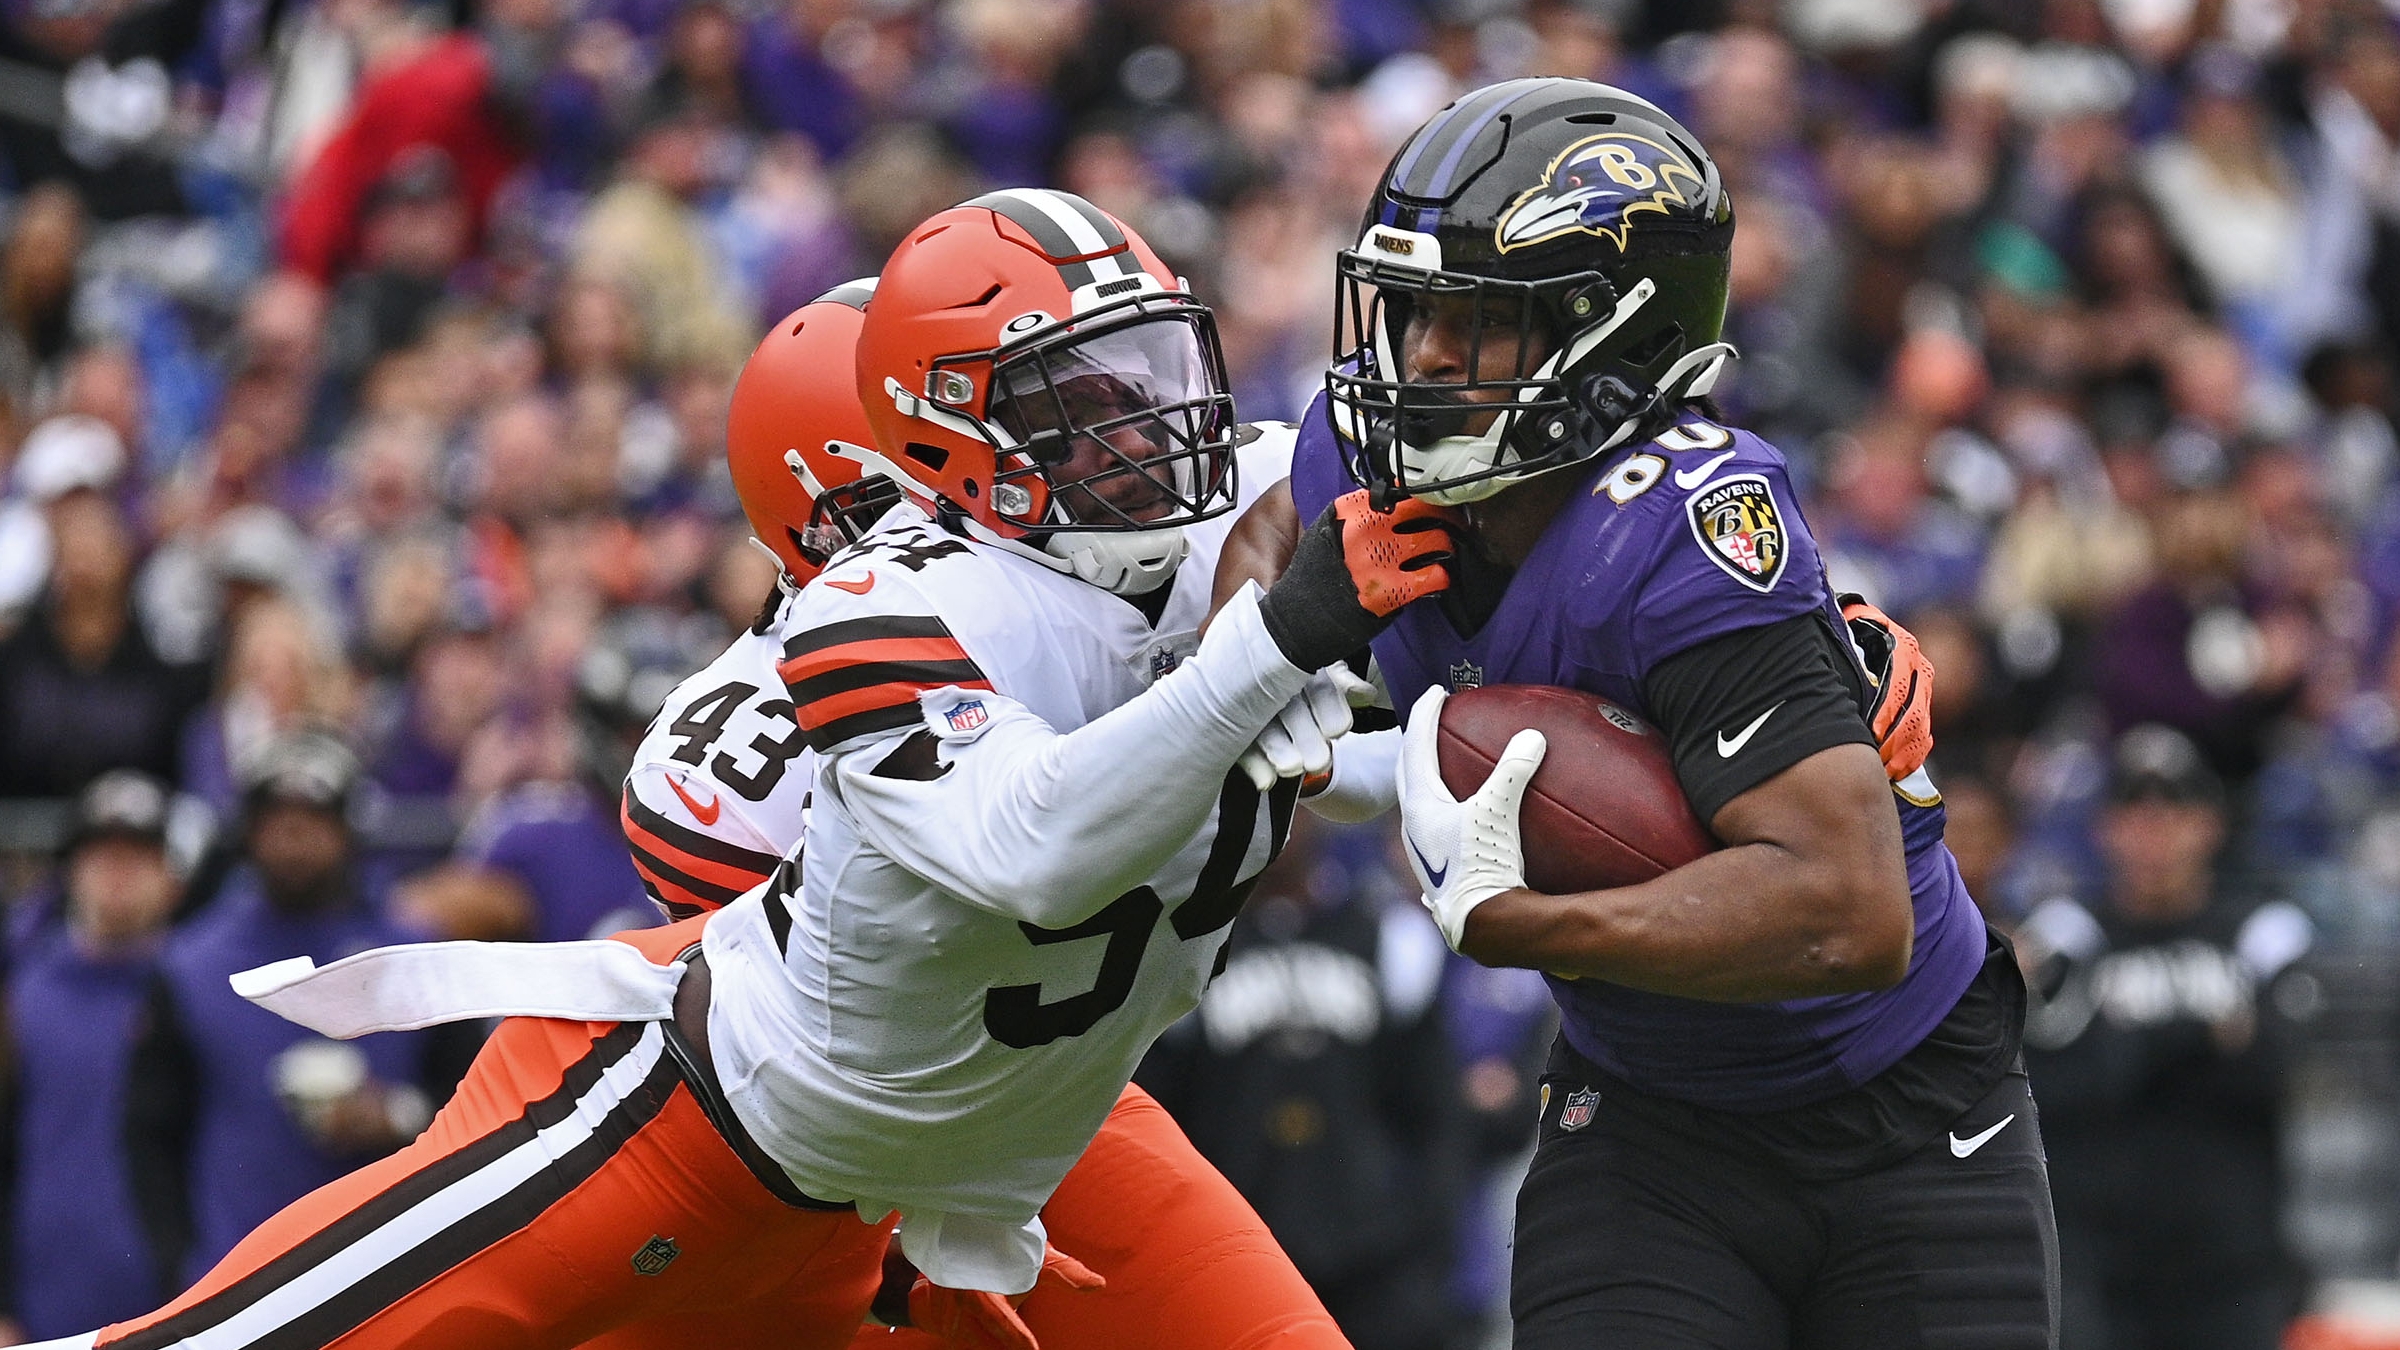 Ravens will face Browns on Saturday, Dec. 17, at 4:30 p.m. as part of NFL's  tripleheader schedule